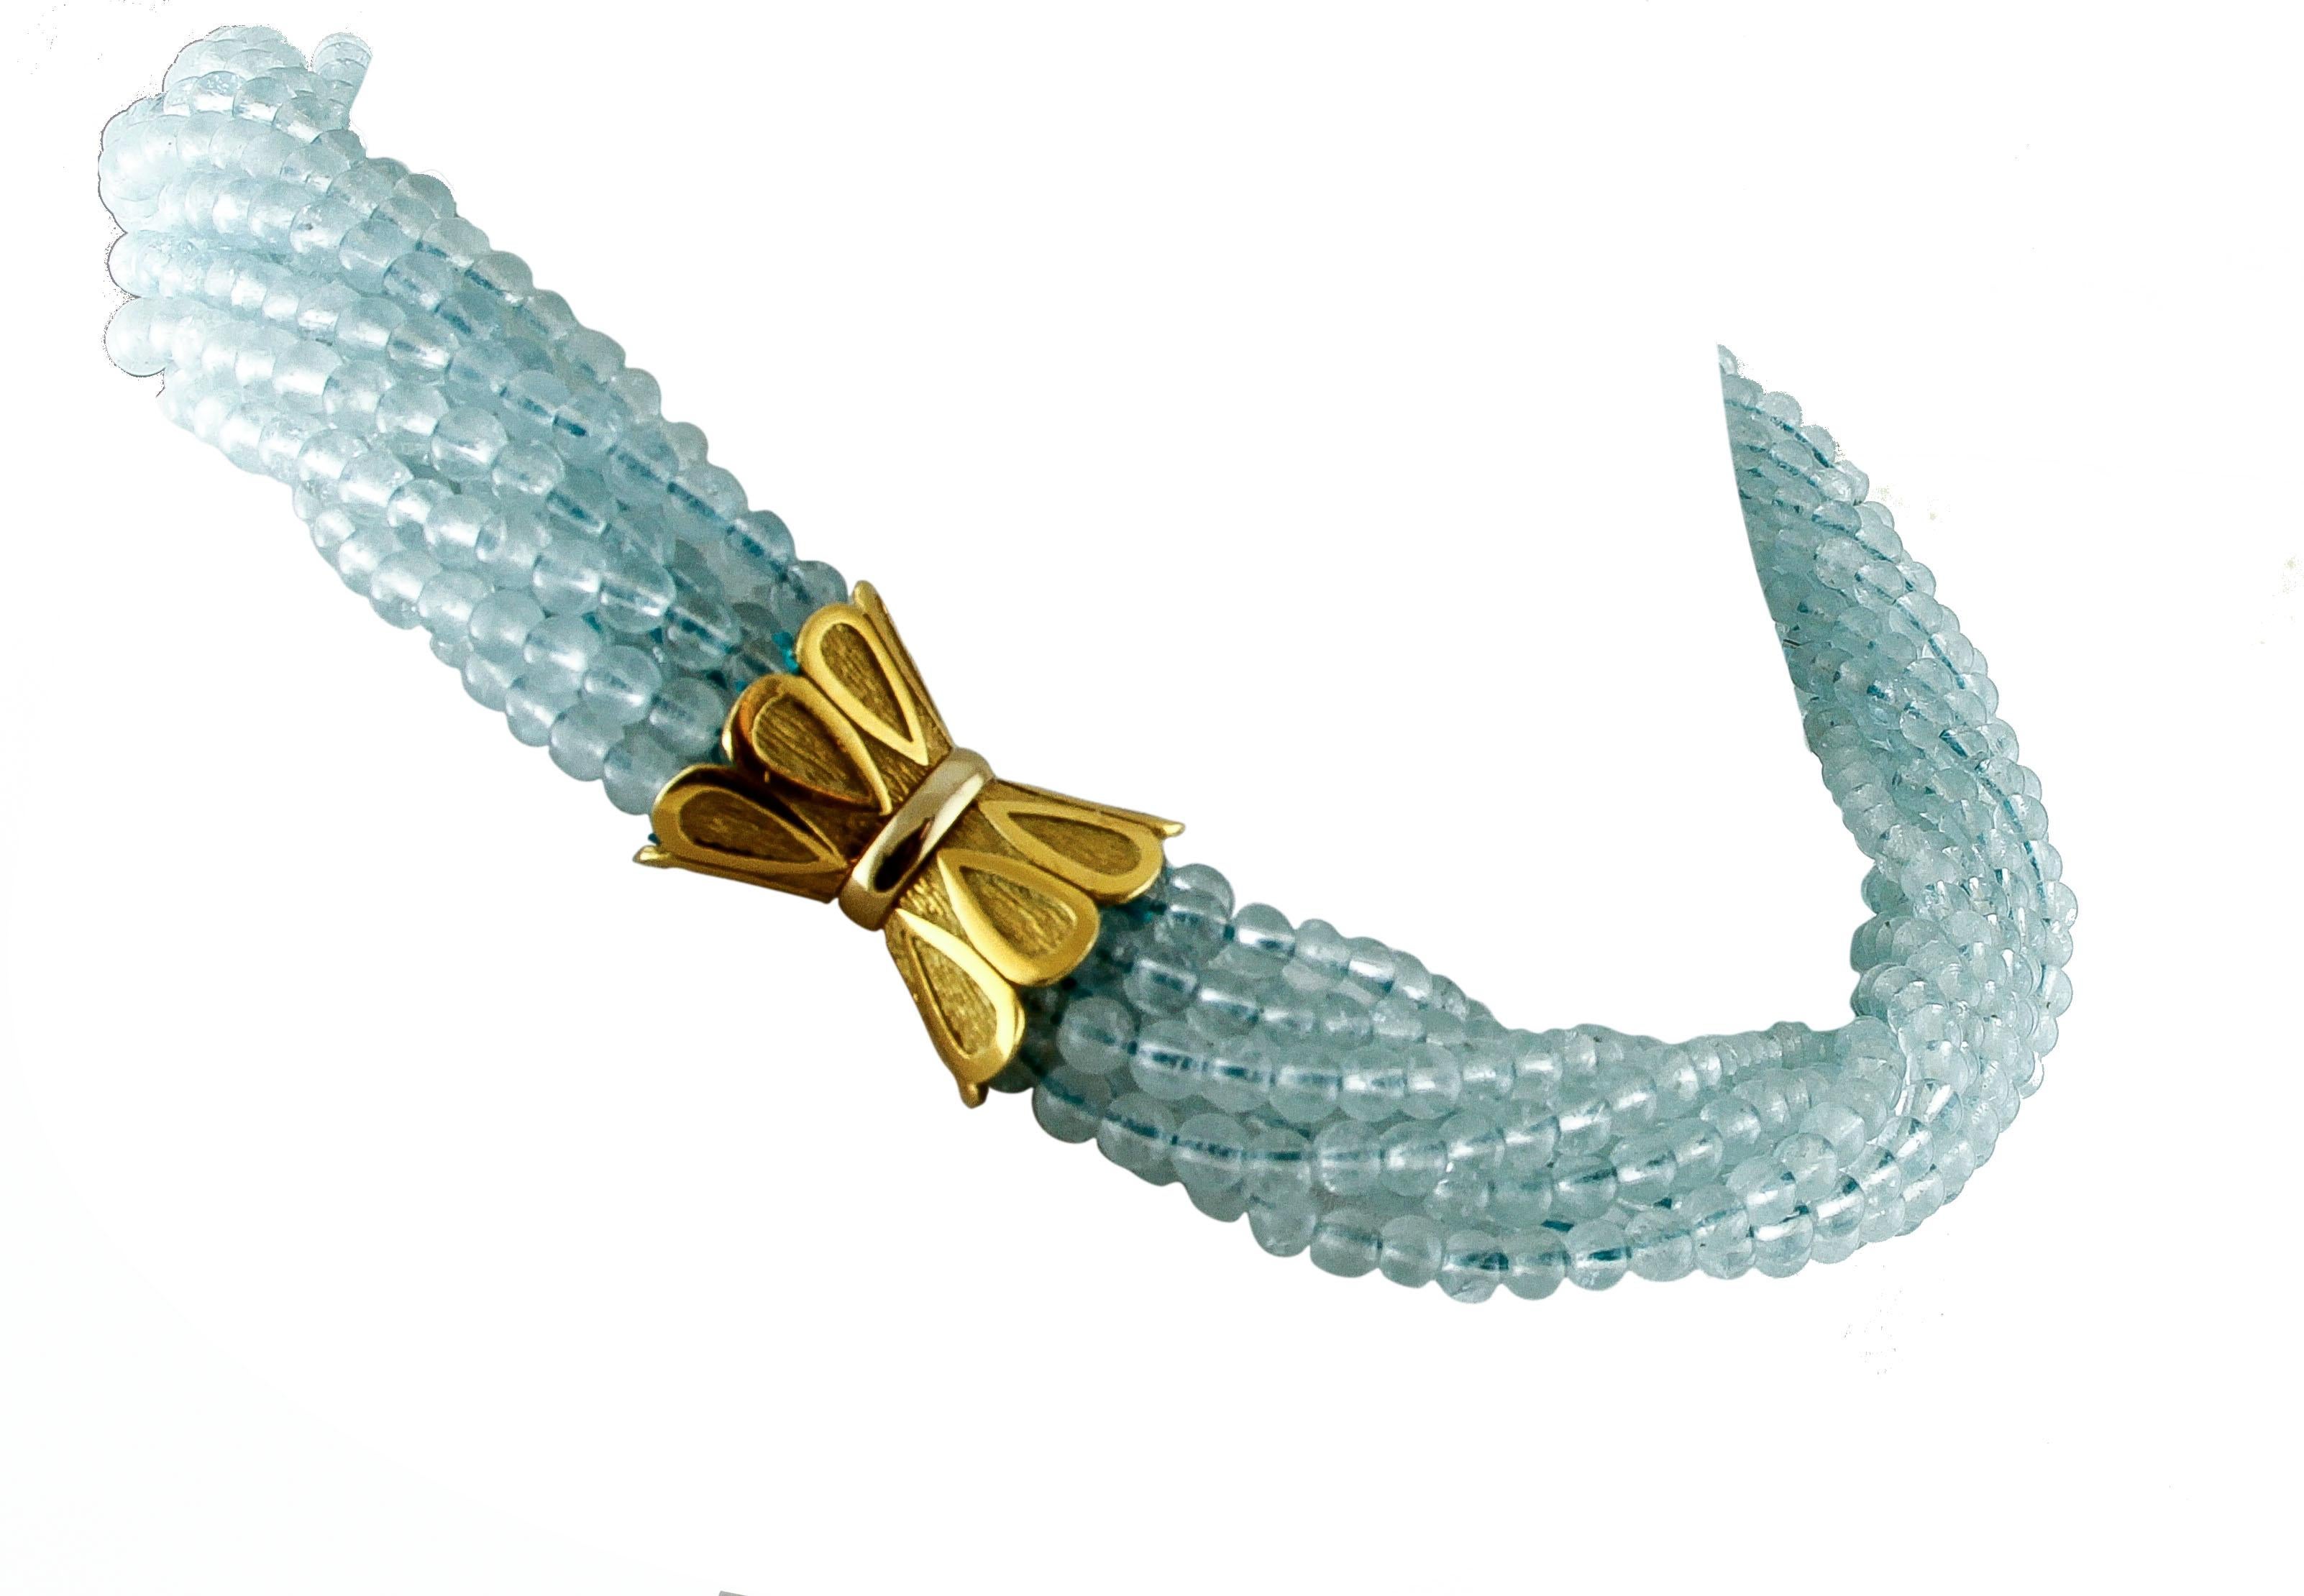 Marvelous intertwined beaded necklace realized with 526 ct of Aquamarine spheres and a closure in 18k yellow gold. 
This necklace is totally handmade by Italian master goldsmiths
Aquamarine 526 ct
Total weight 119 g
length around 40 cm
RF +FUOU

For